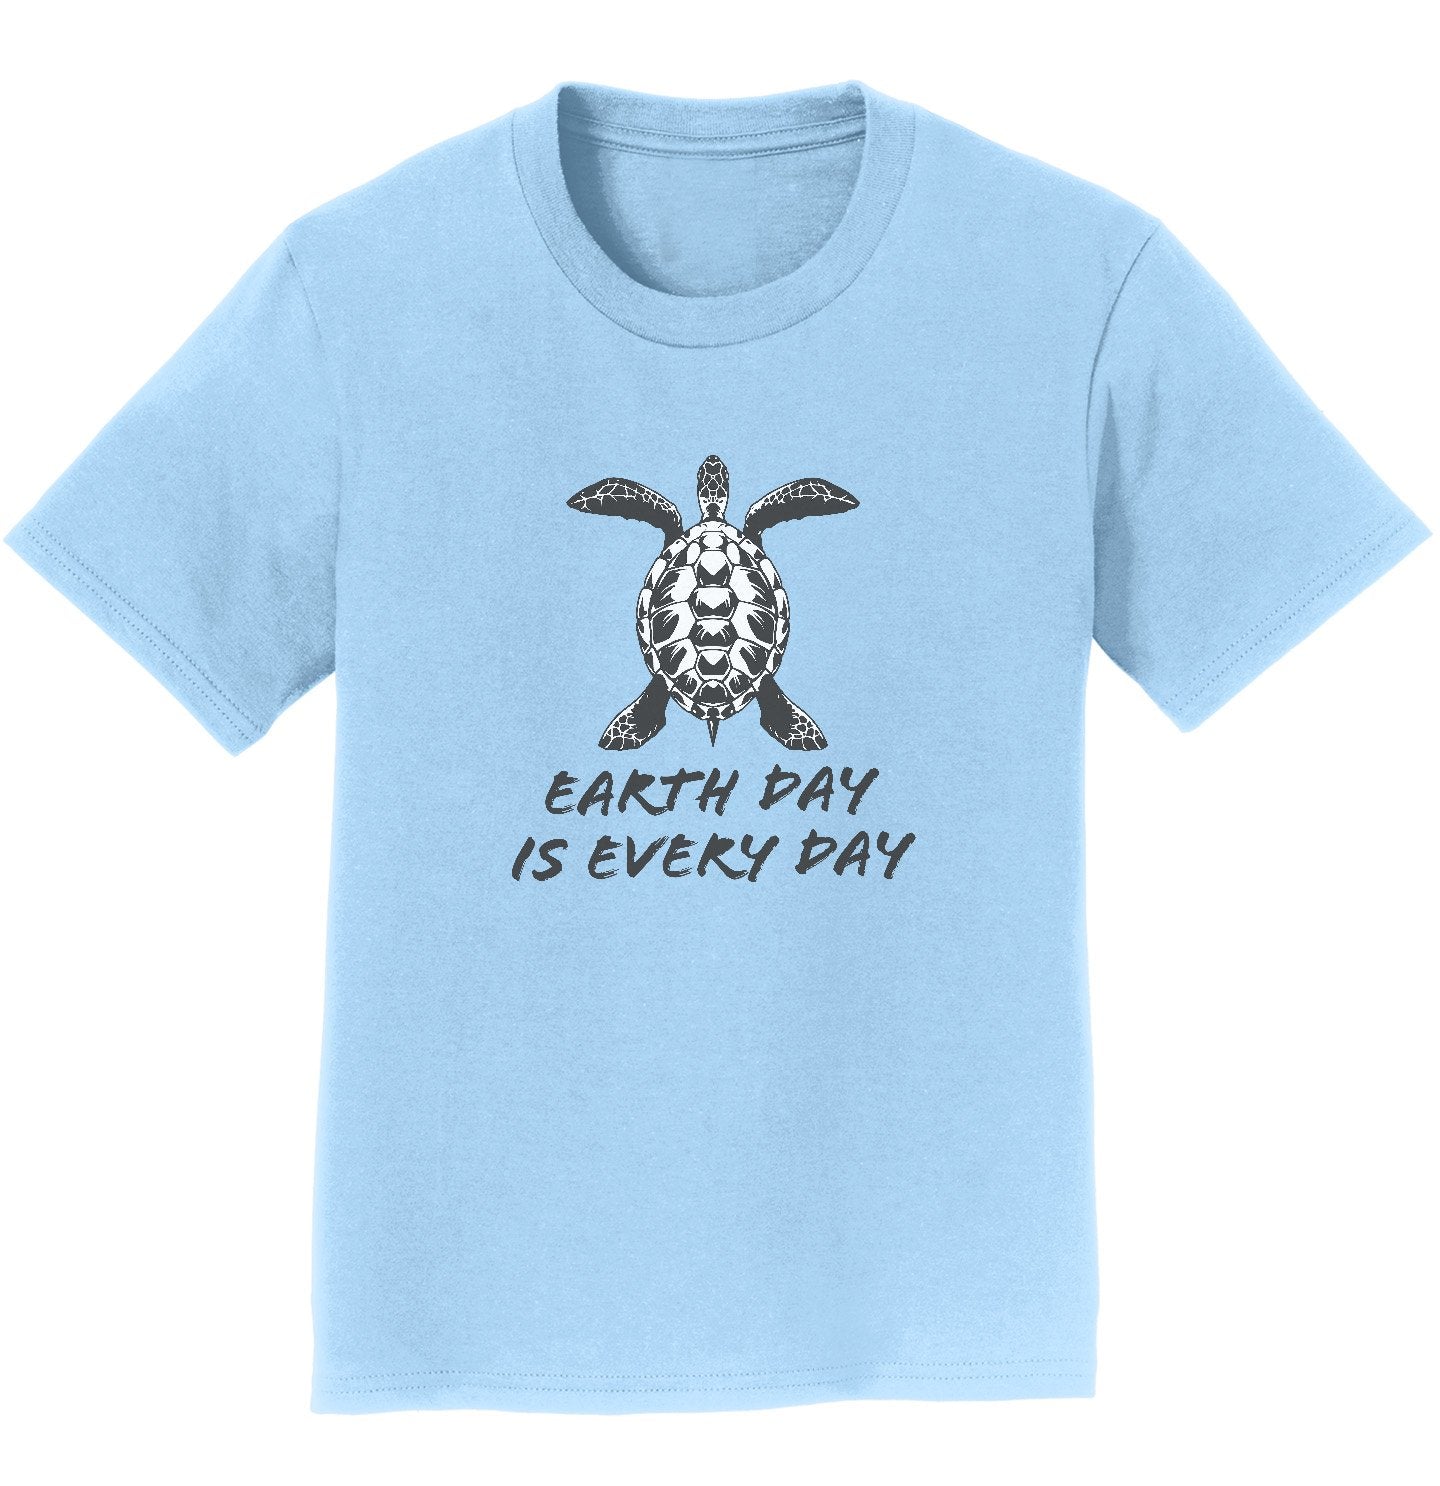 Animal Pride - Earth Day is Every Day Sea Turtle - Kids' Unisex T-Shirt